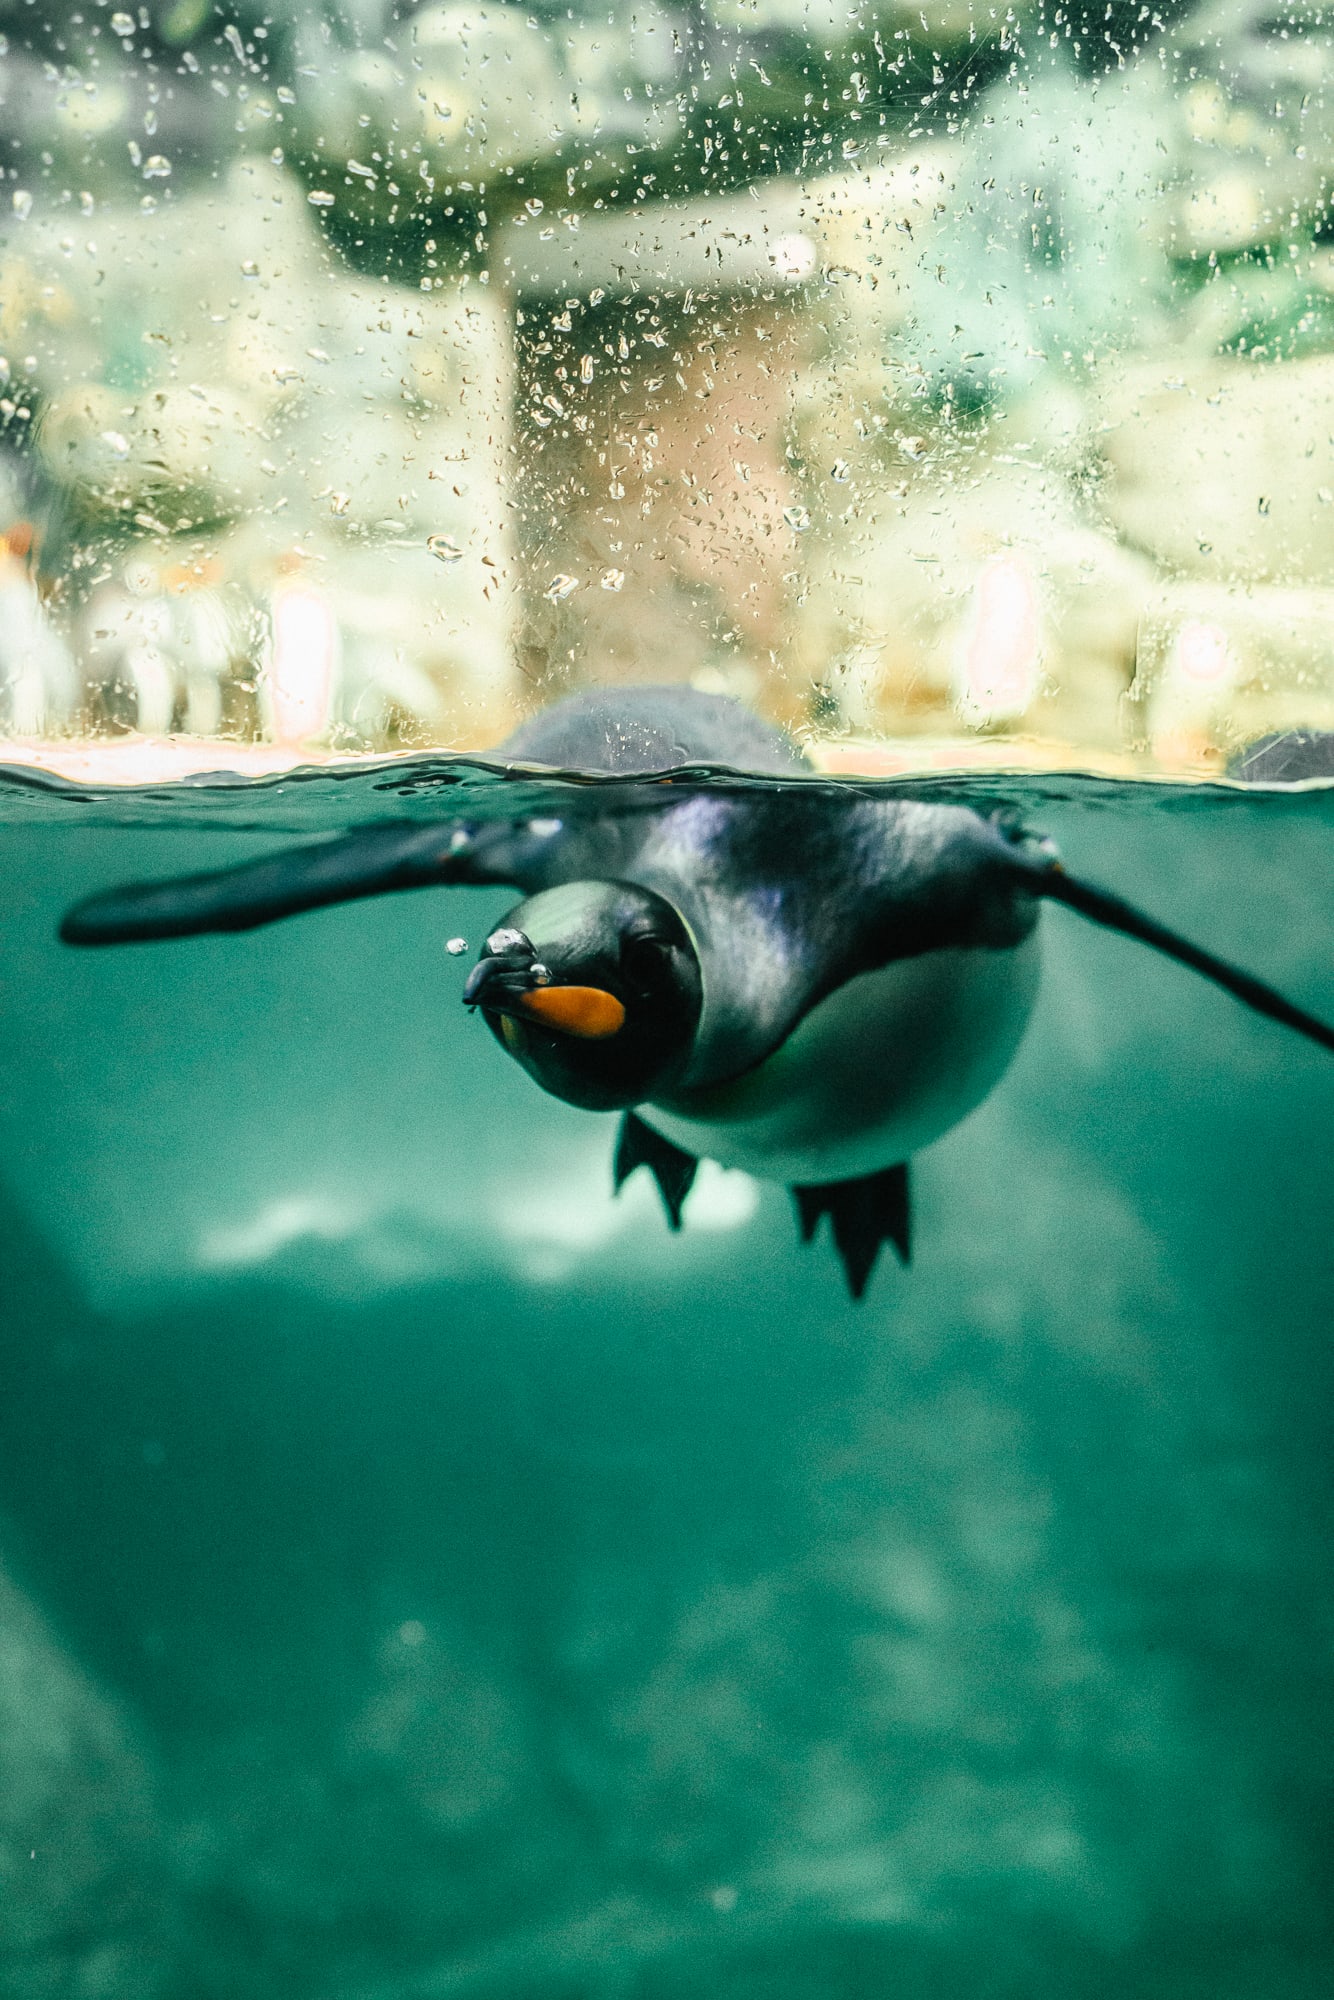 Penguin dipping under water